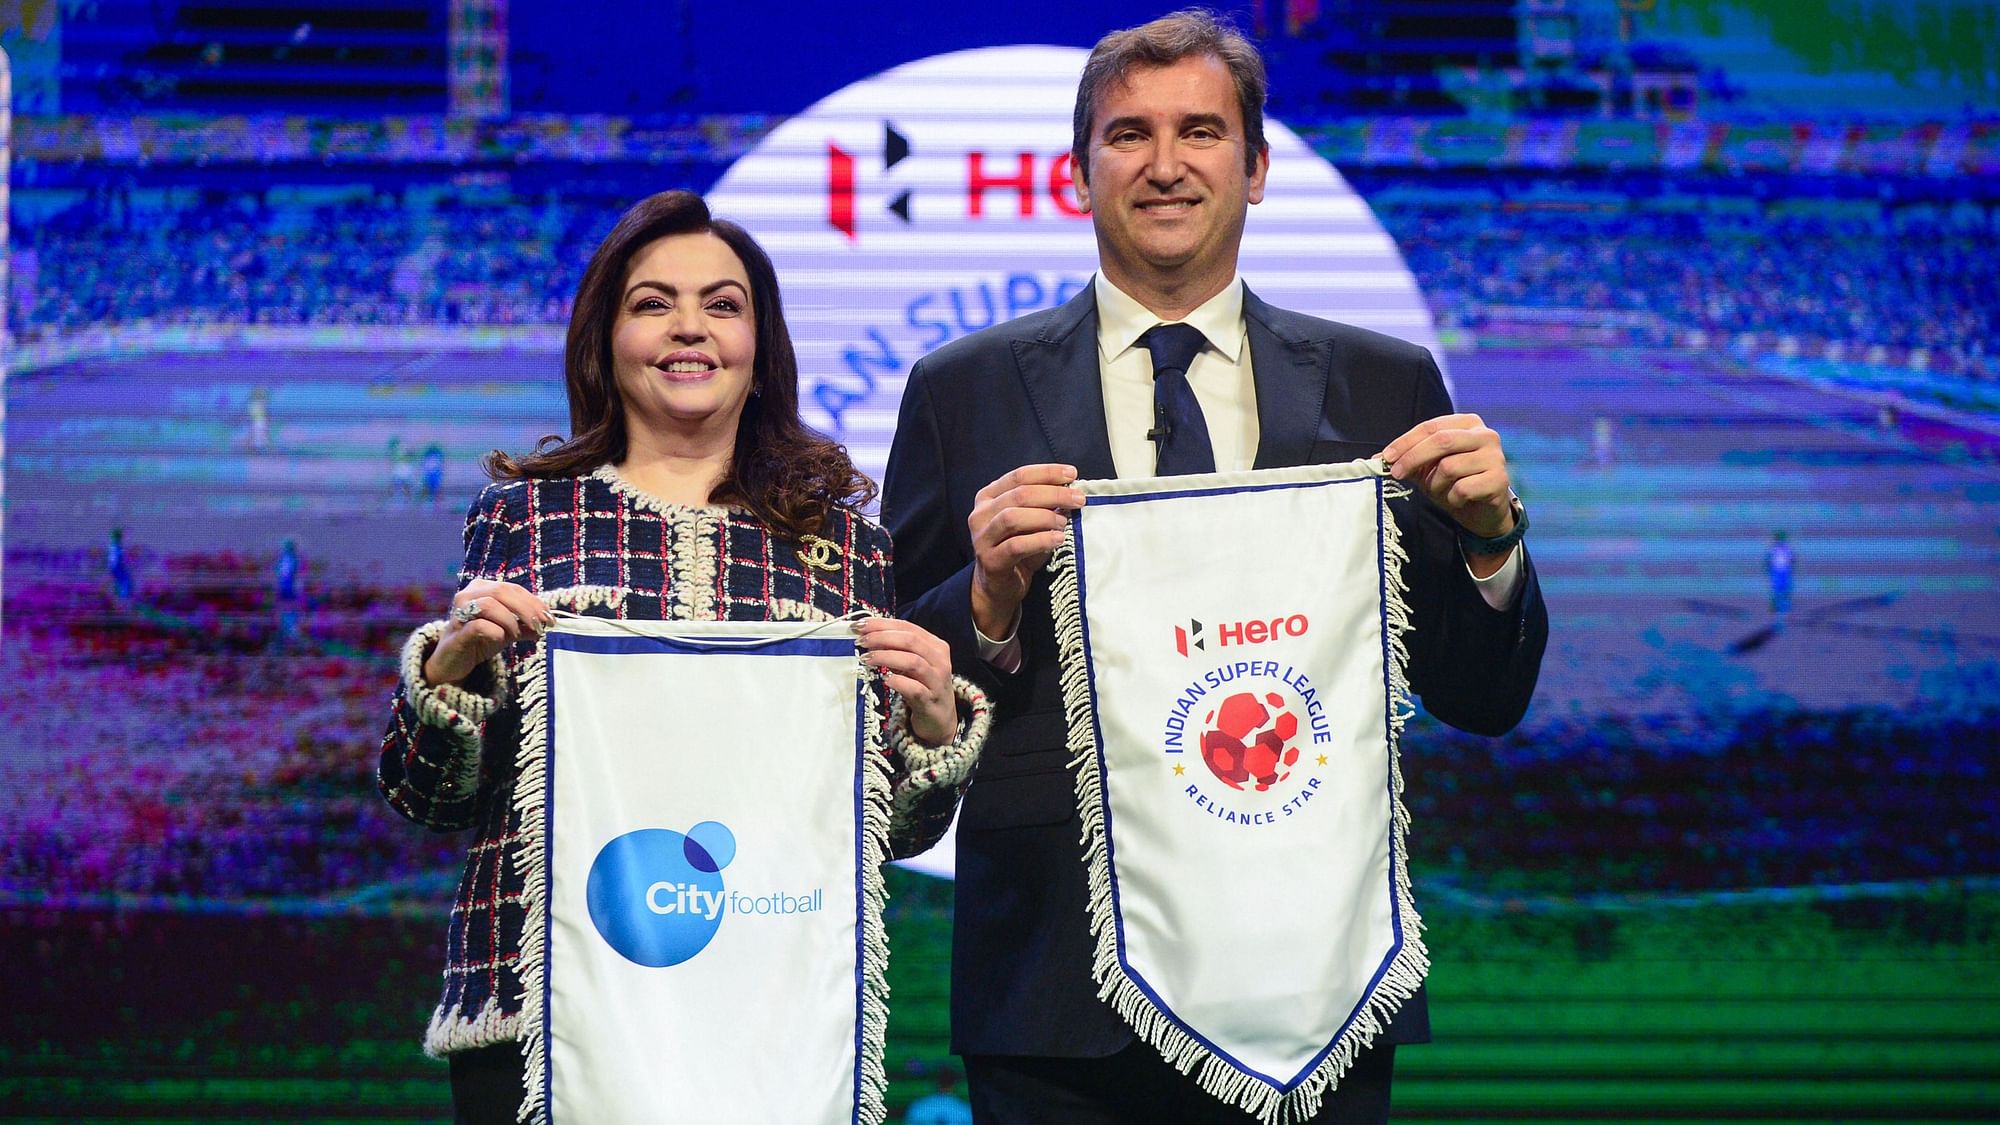  Football Sports Development Limited (FSDL) chairperson Nita Ambani and City Football Group CEO Ferran Soriano at a press conference in Mumbai on Thursday, 28 November.